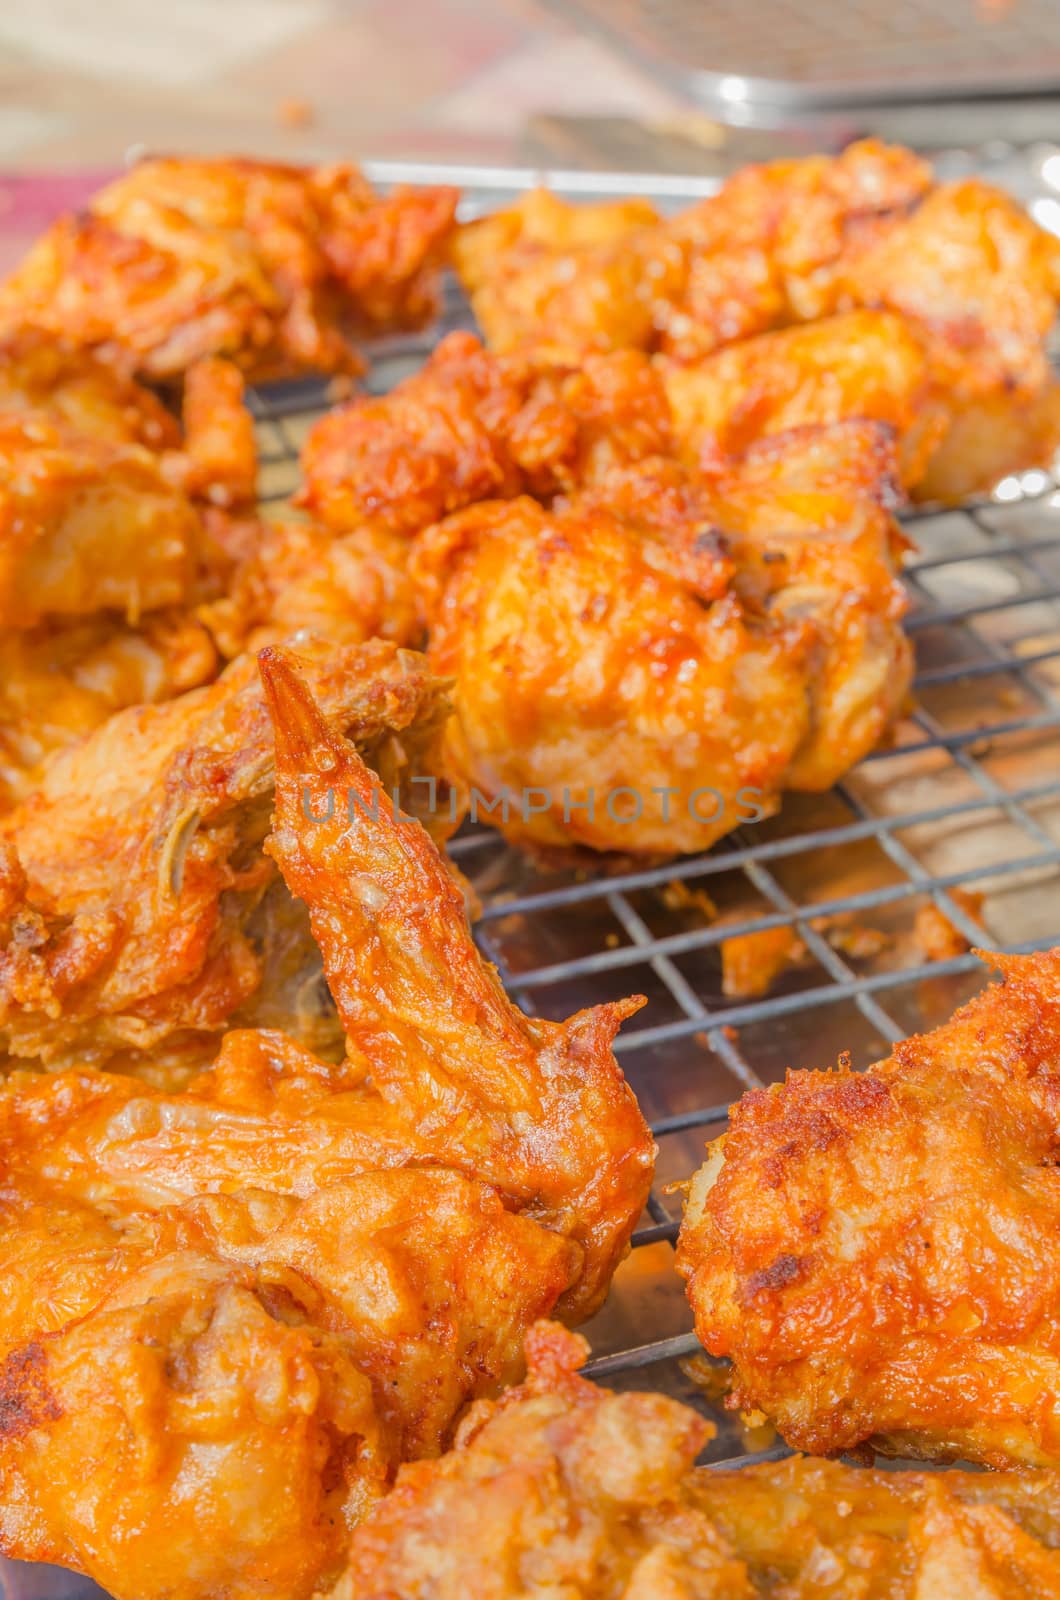 Hot fried chicken wings sale in the fresh food market at Rayong Thailand